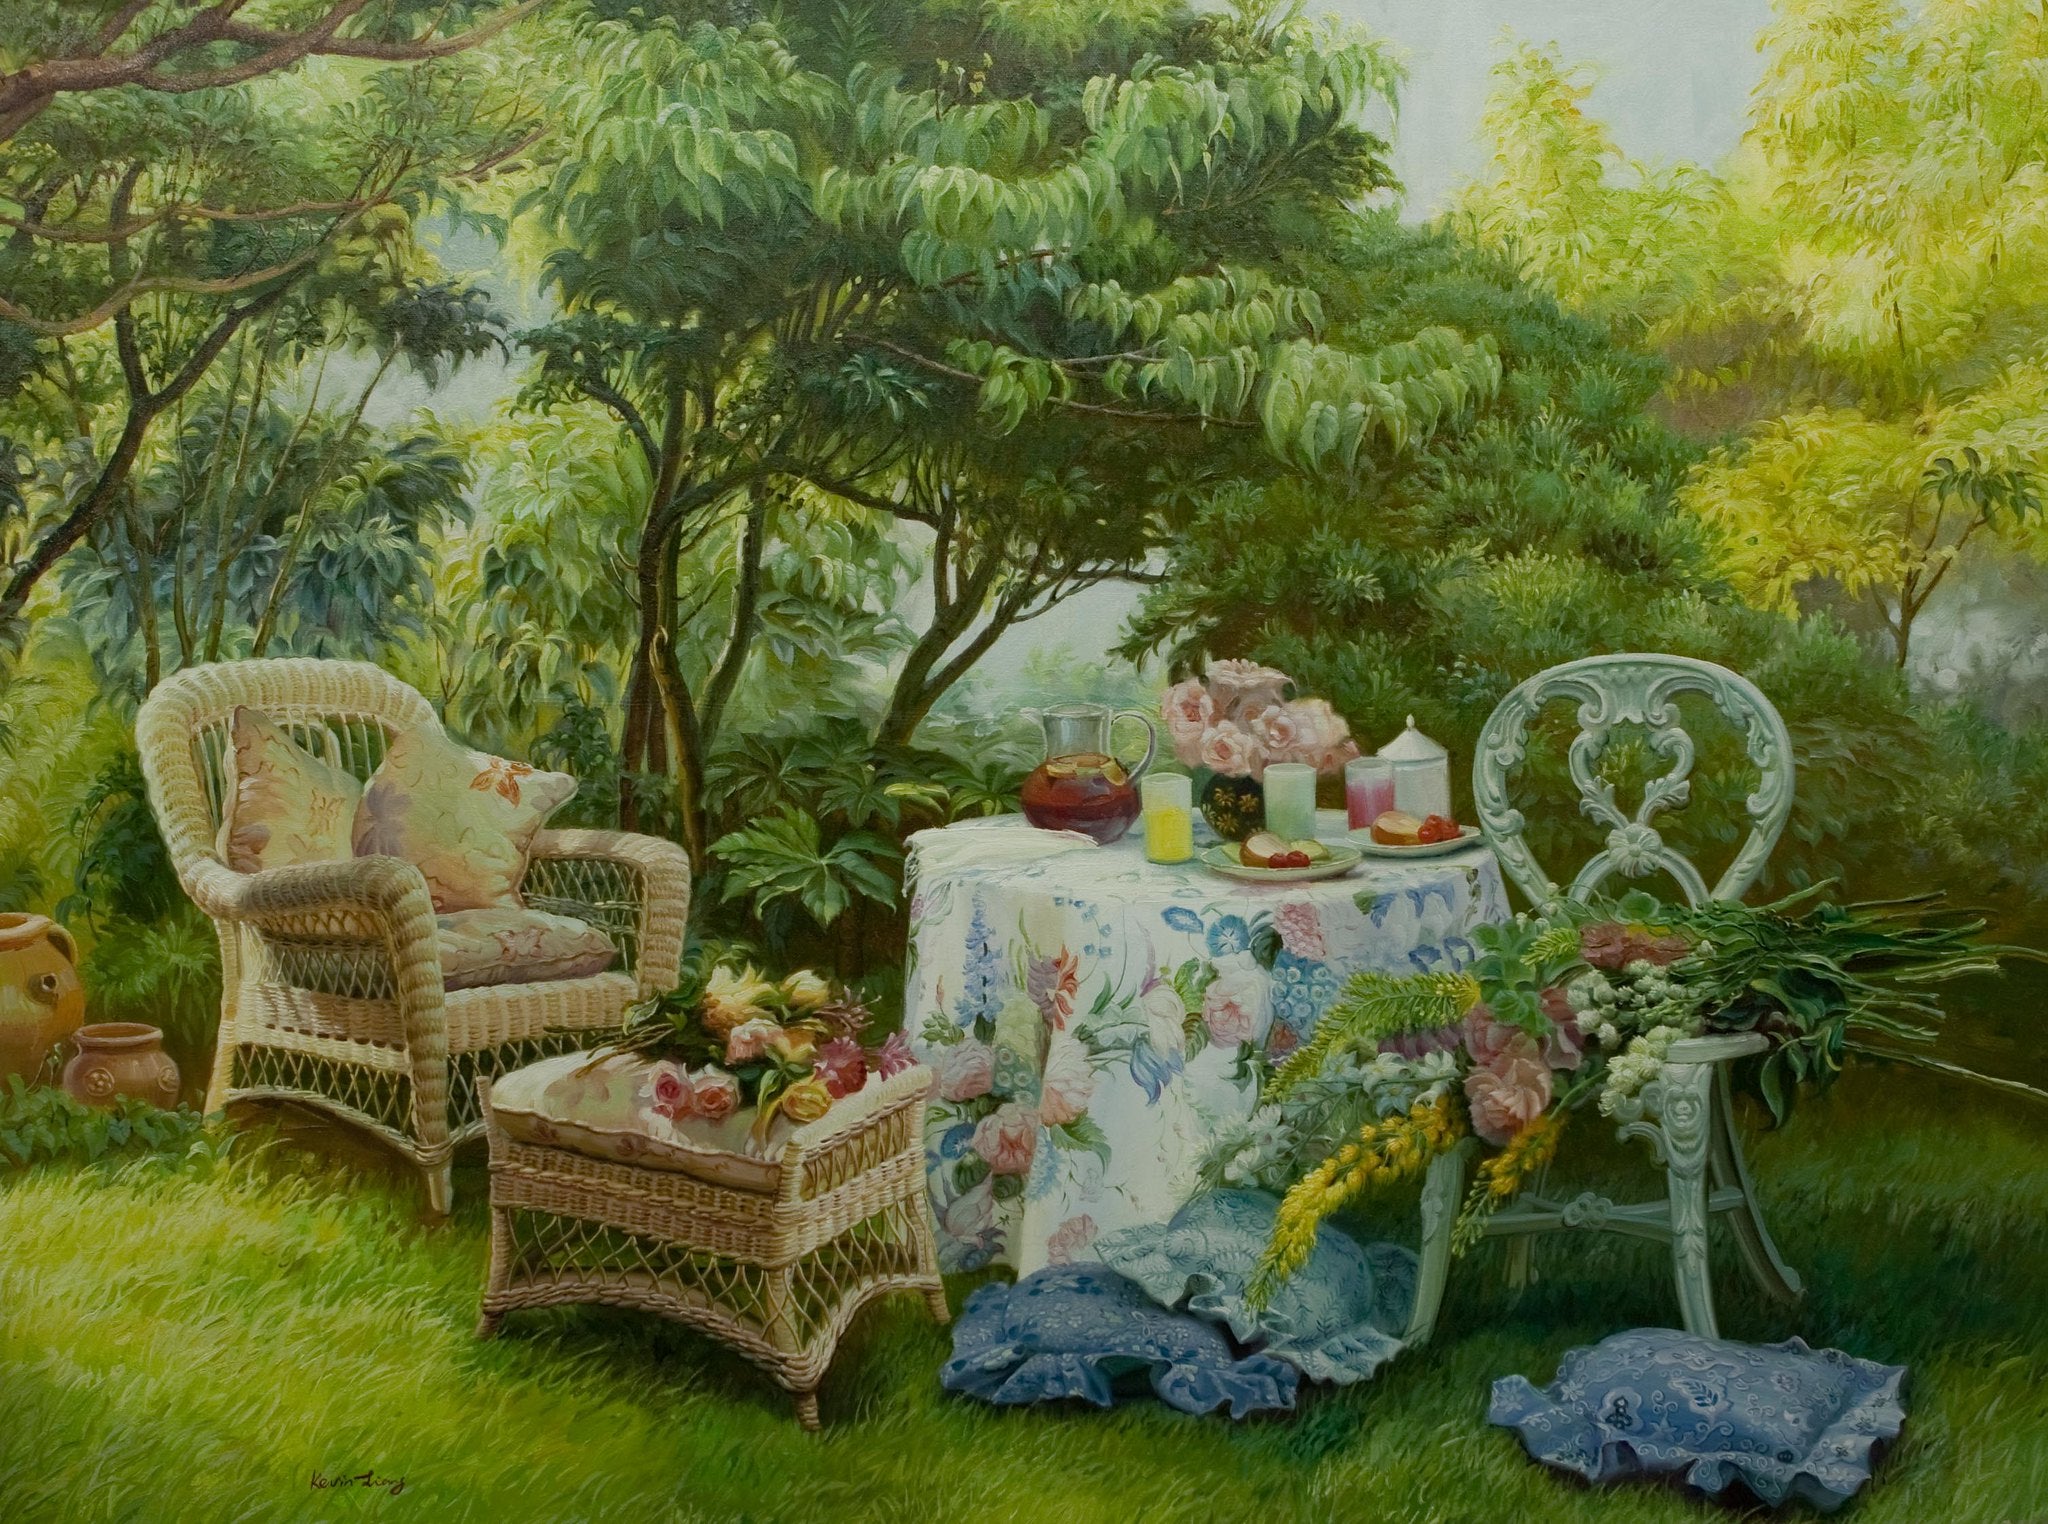 "Summer Garden"  Kevin Liang  2004  Original oil on canvas with frame 36" x 46".